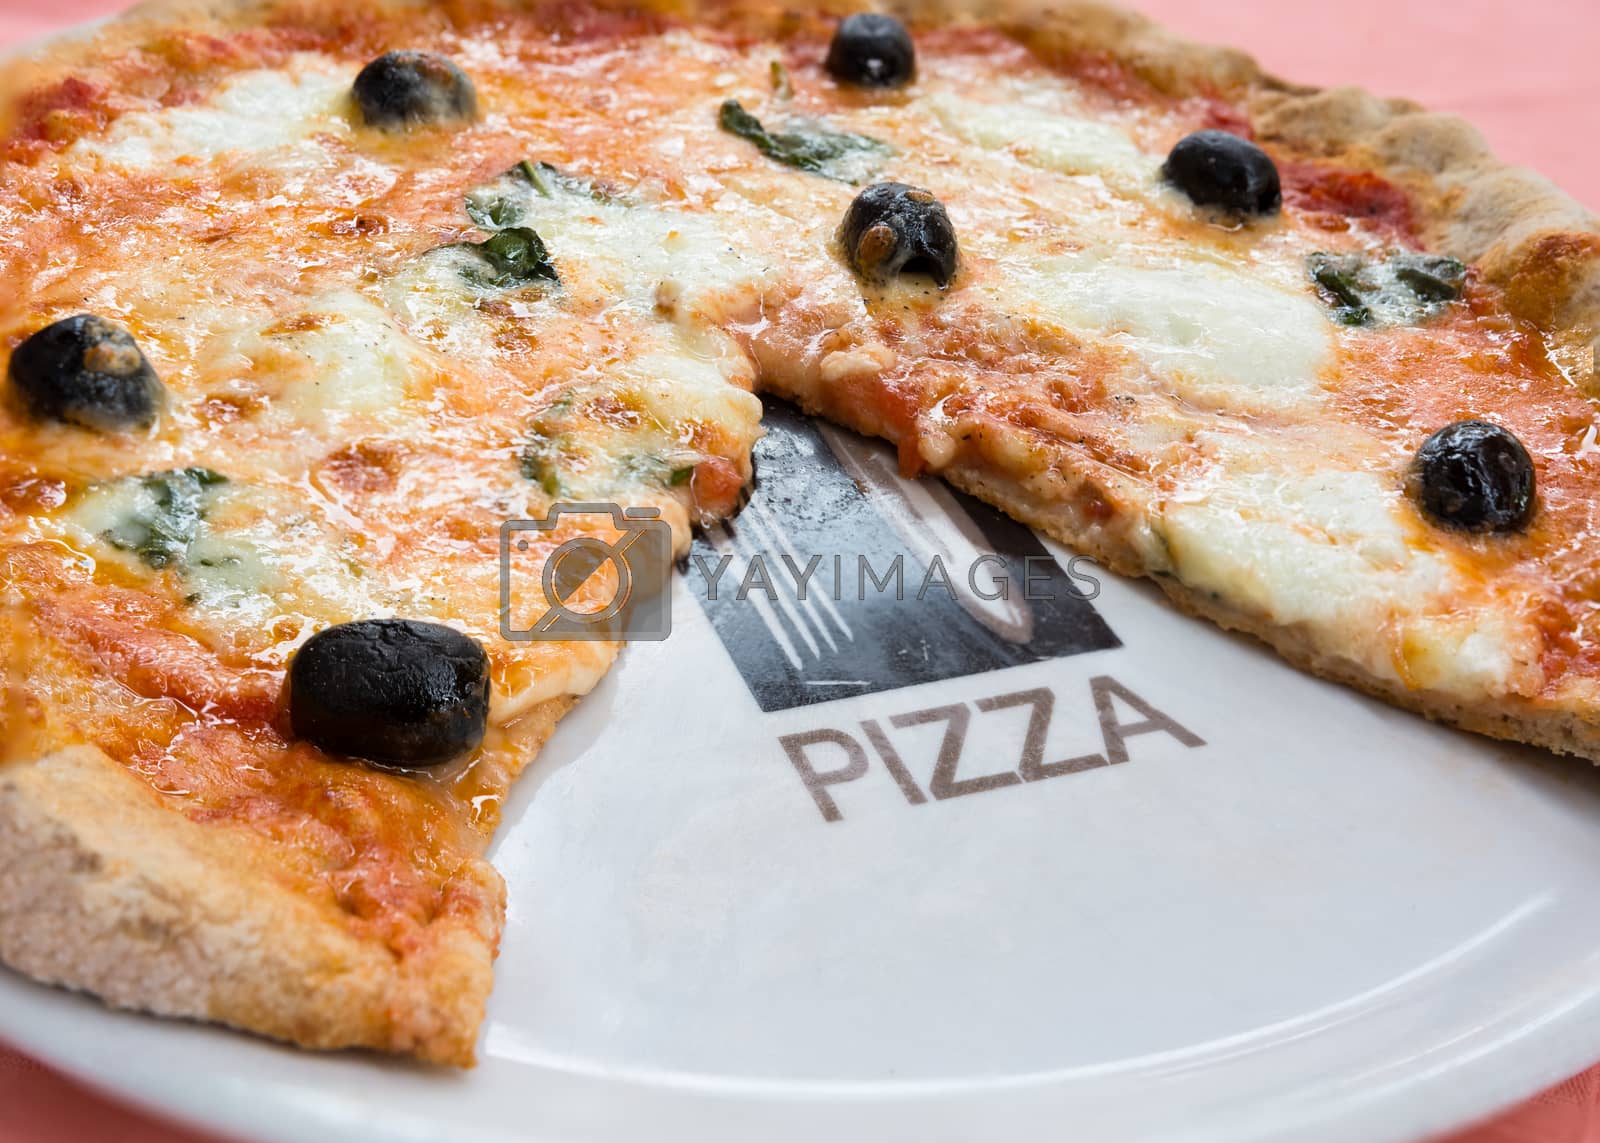 Royalty free image of wheat pizza with olives and basil by Robertobinetti70